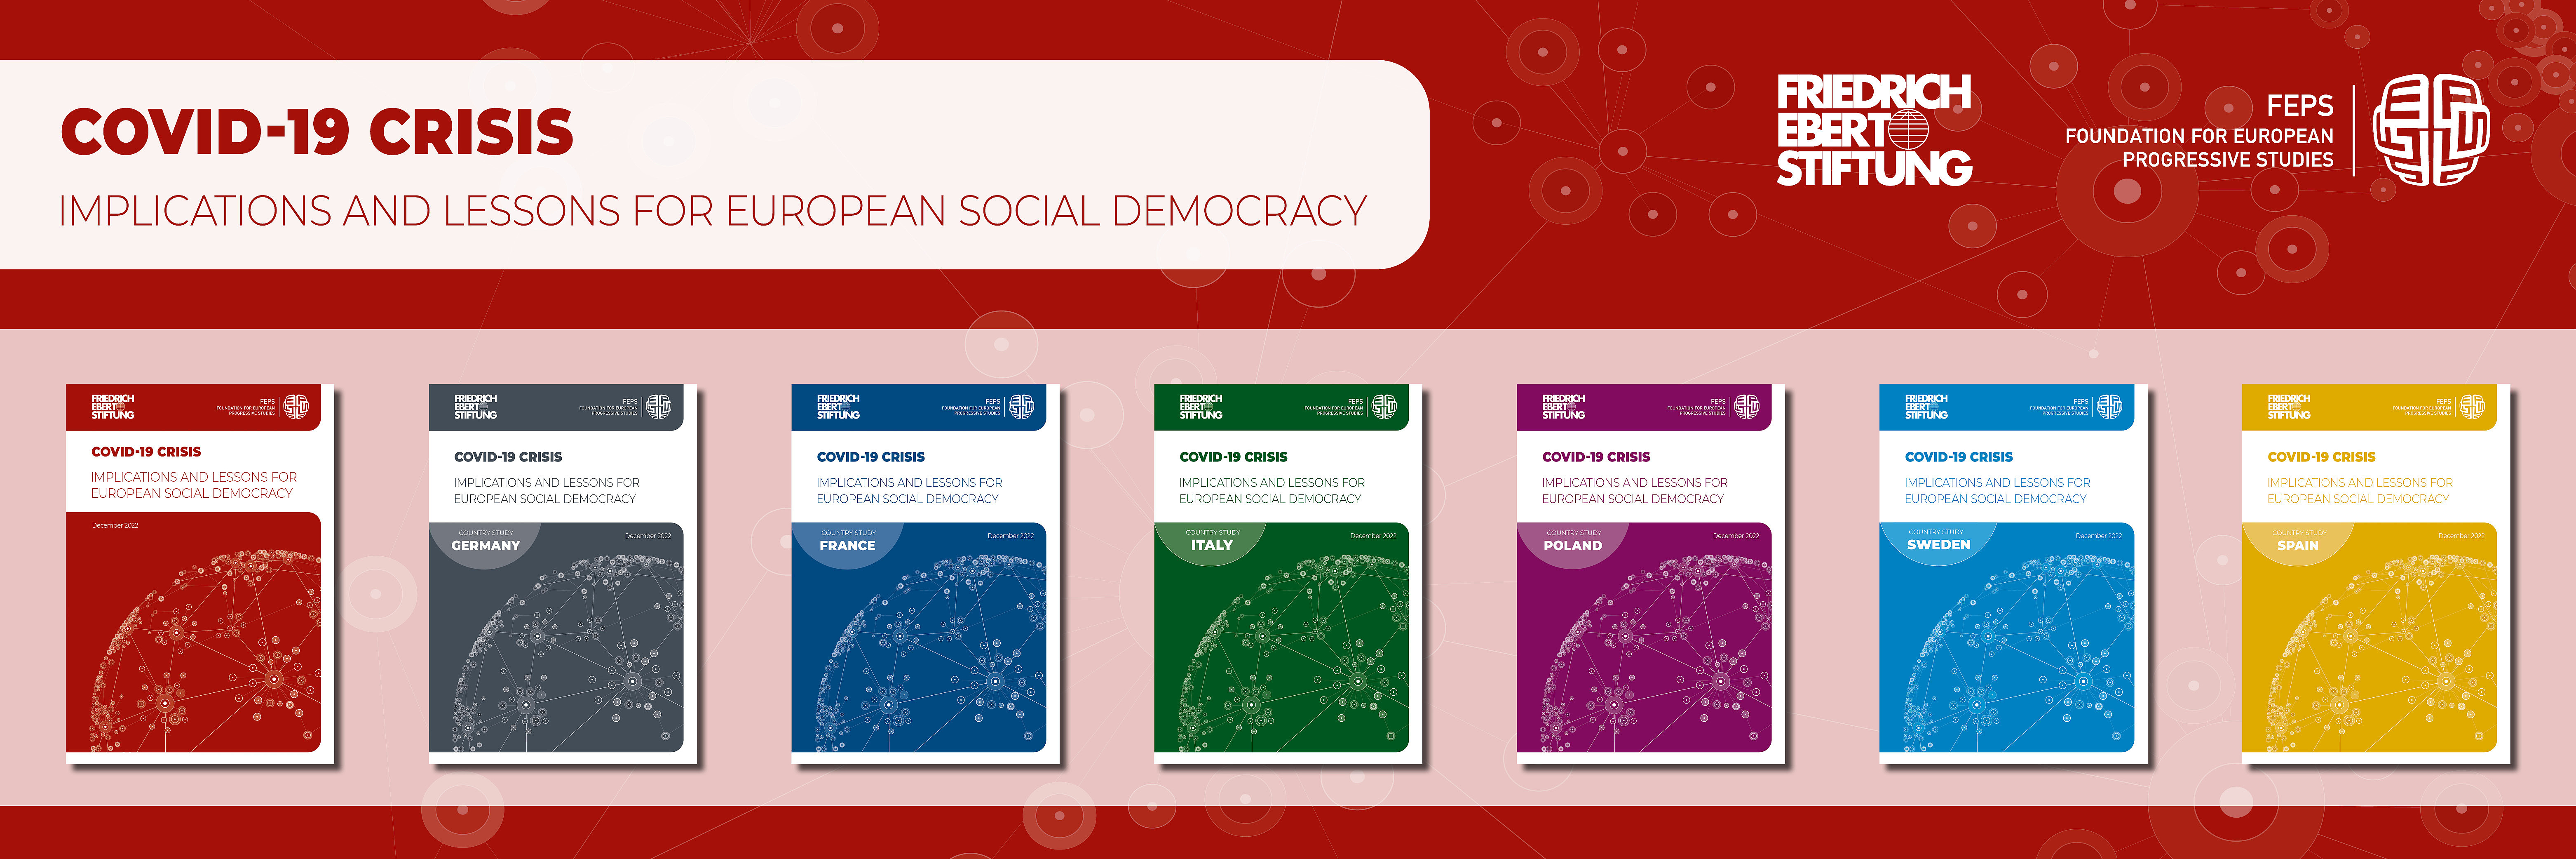 Visible are the title of the study "The Covid 19 Crisis: Consequences and Lessons for European Social Democracy" and below it the 7 covers of the individual country studies